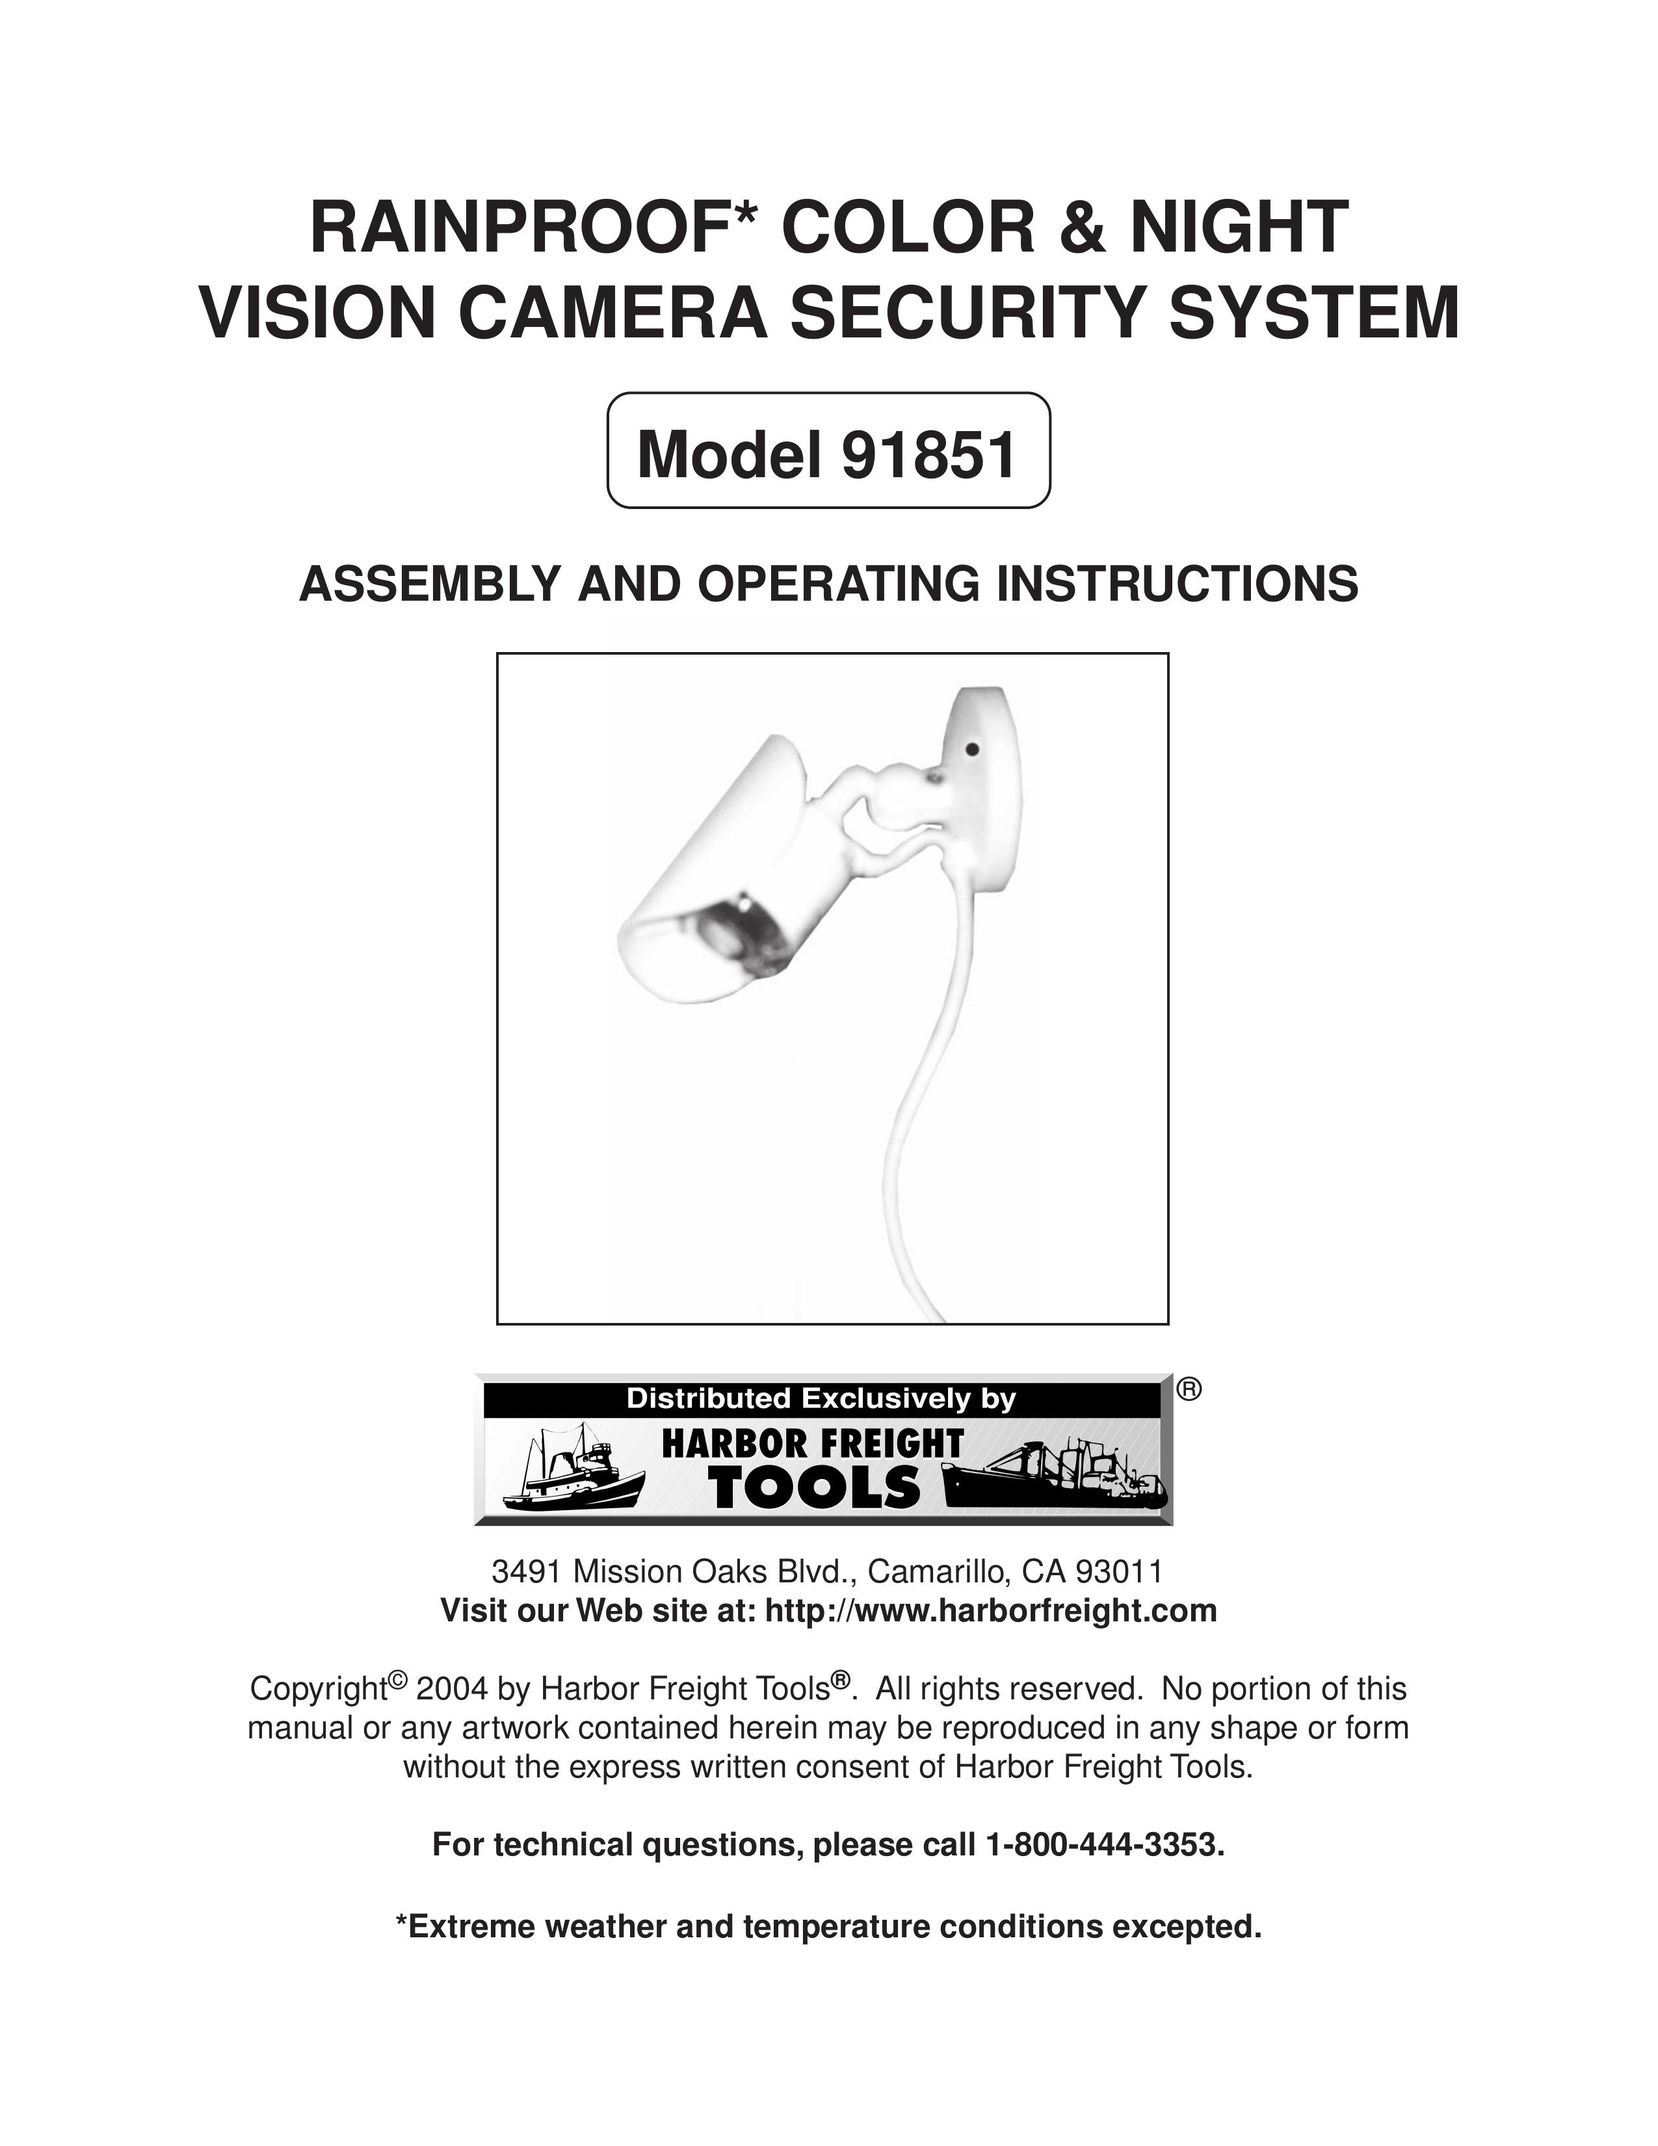 Harbor Freight Tools Model 91851 Home Security System User Manual